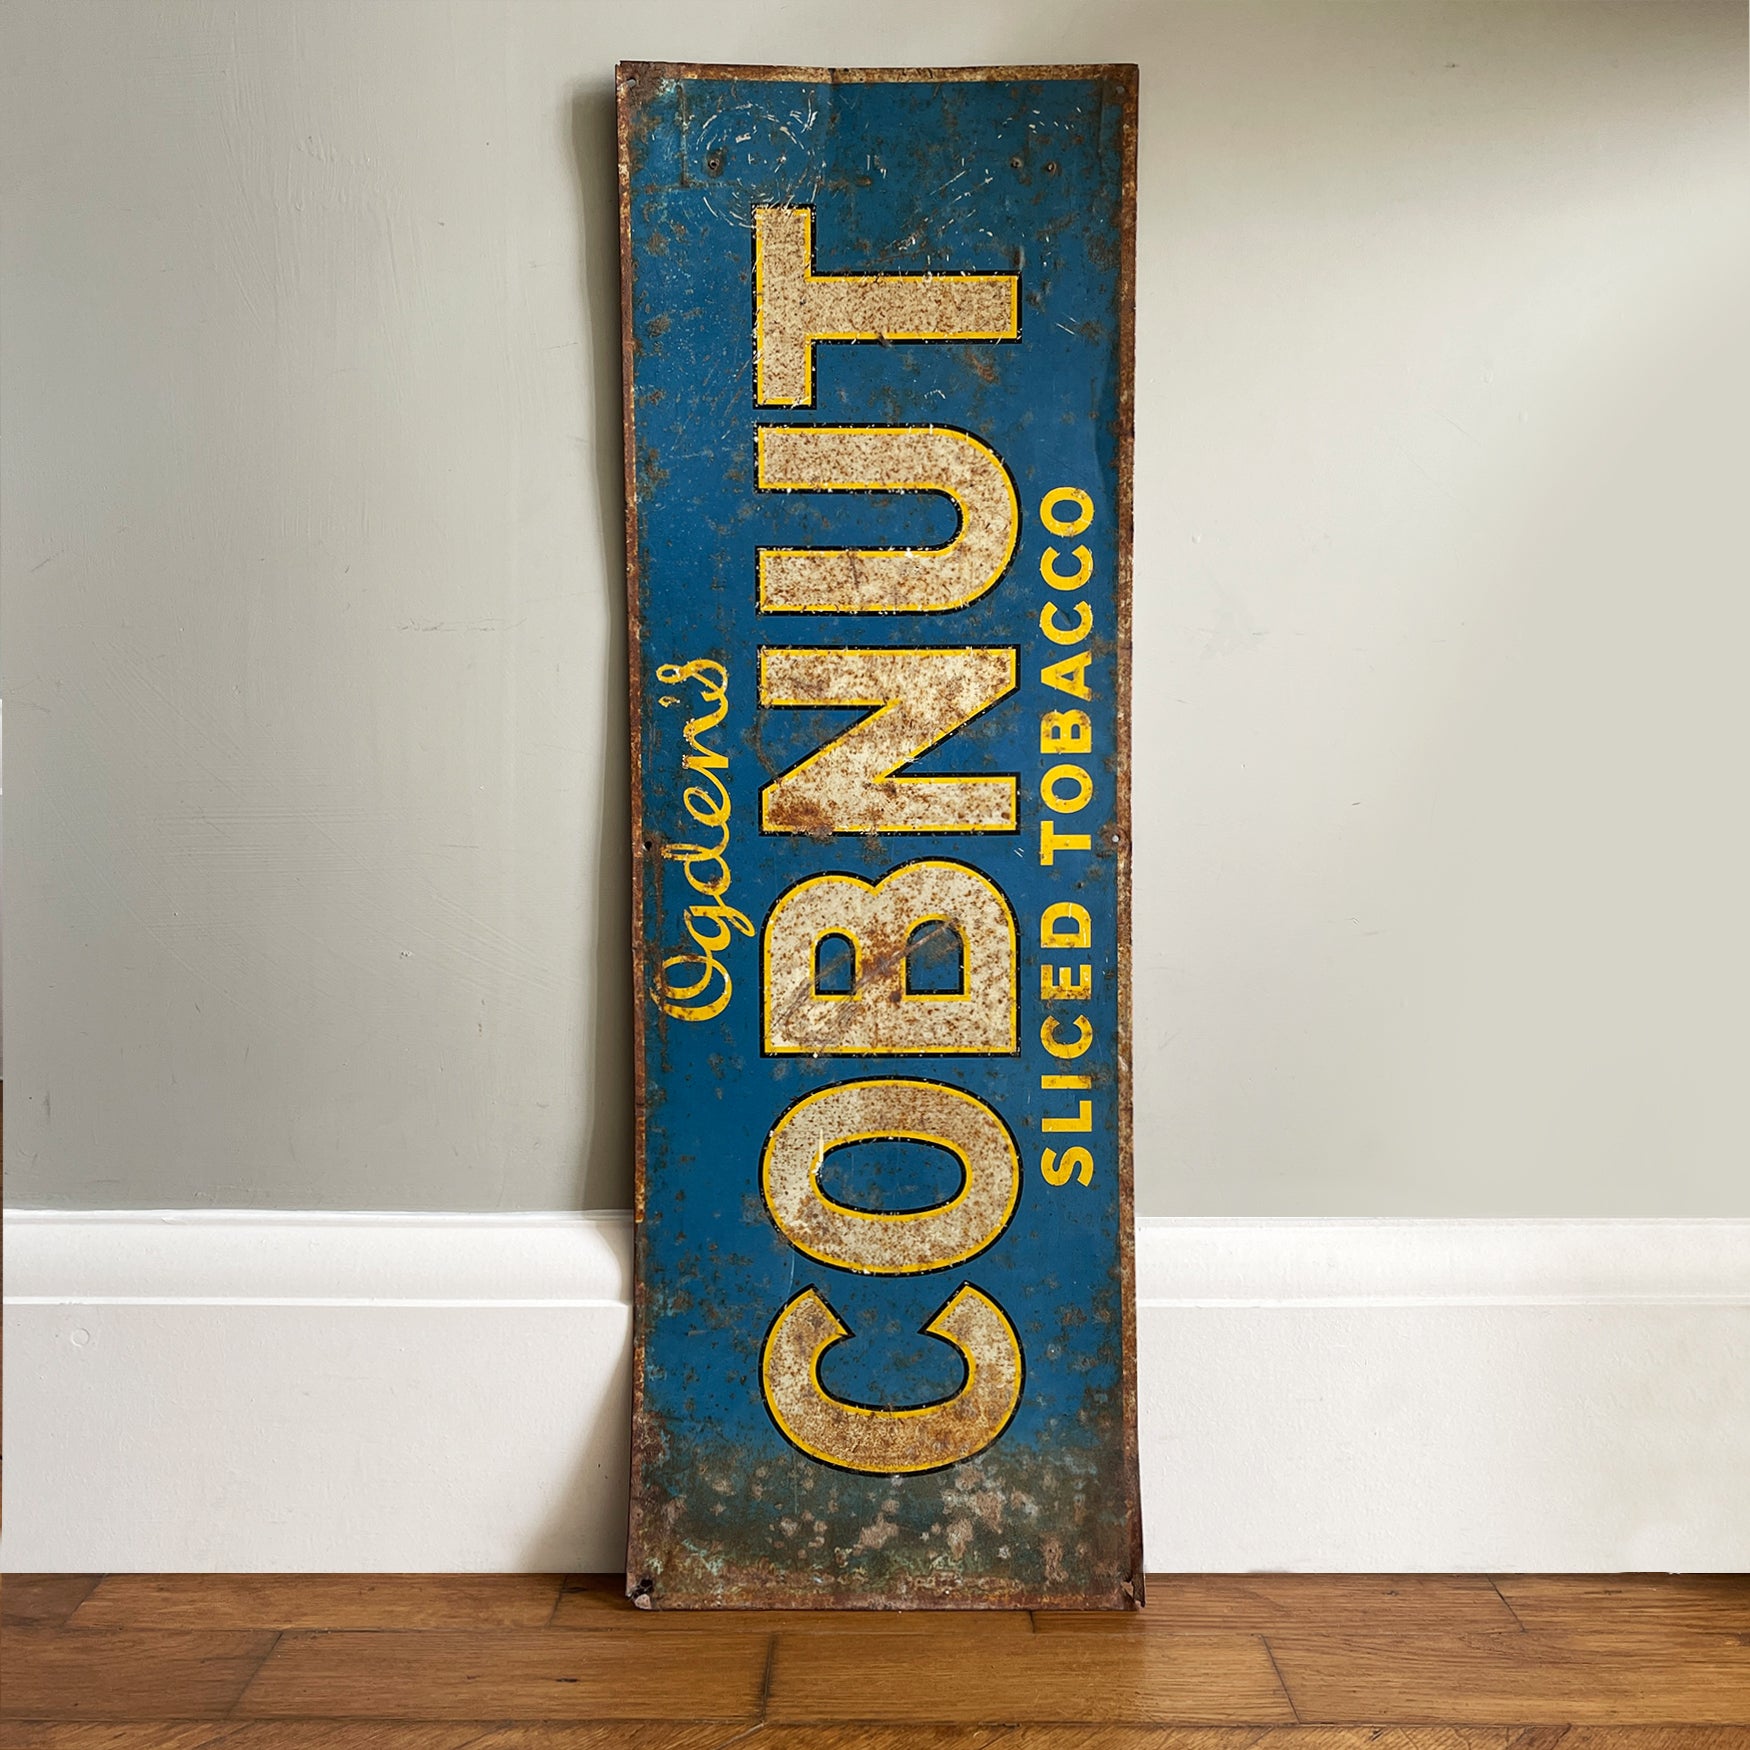 A 1930s Ogden's Cob Nut Sliced Tobacco Tin Sign. In a fantastic bright blue with yellow and black highlights around white type.warm yellow with dark blue type. - SHOP NOW - www.intovintage.co.uk